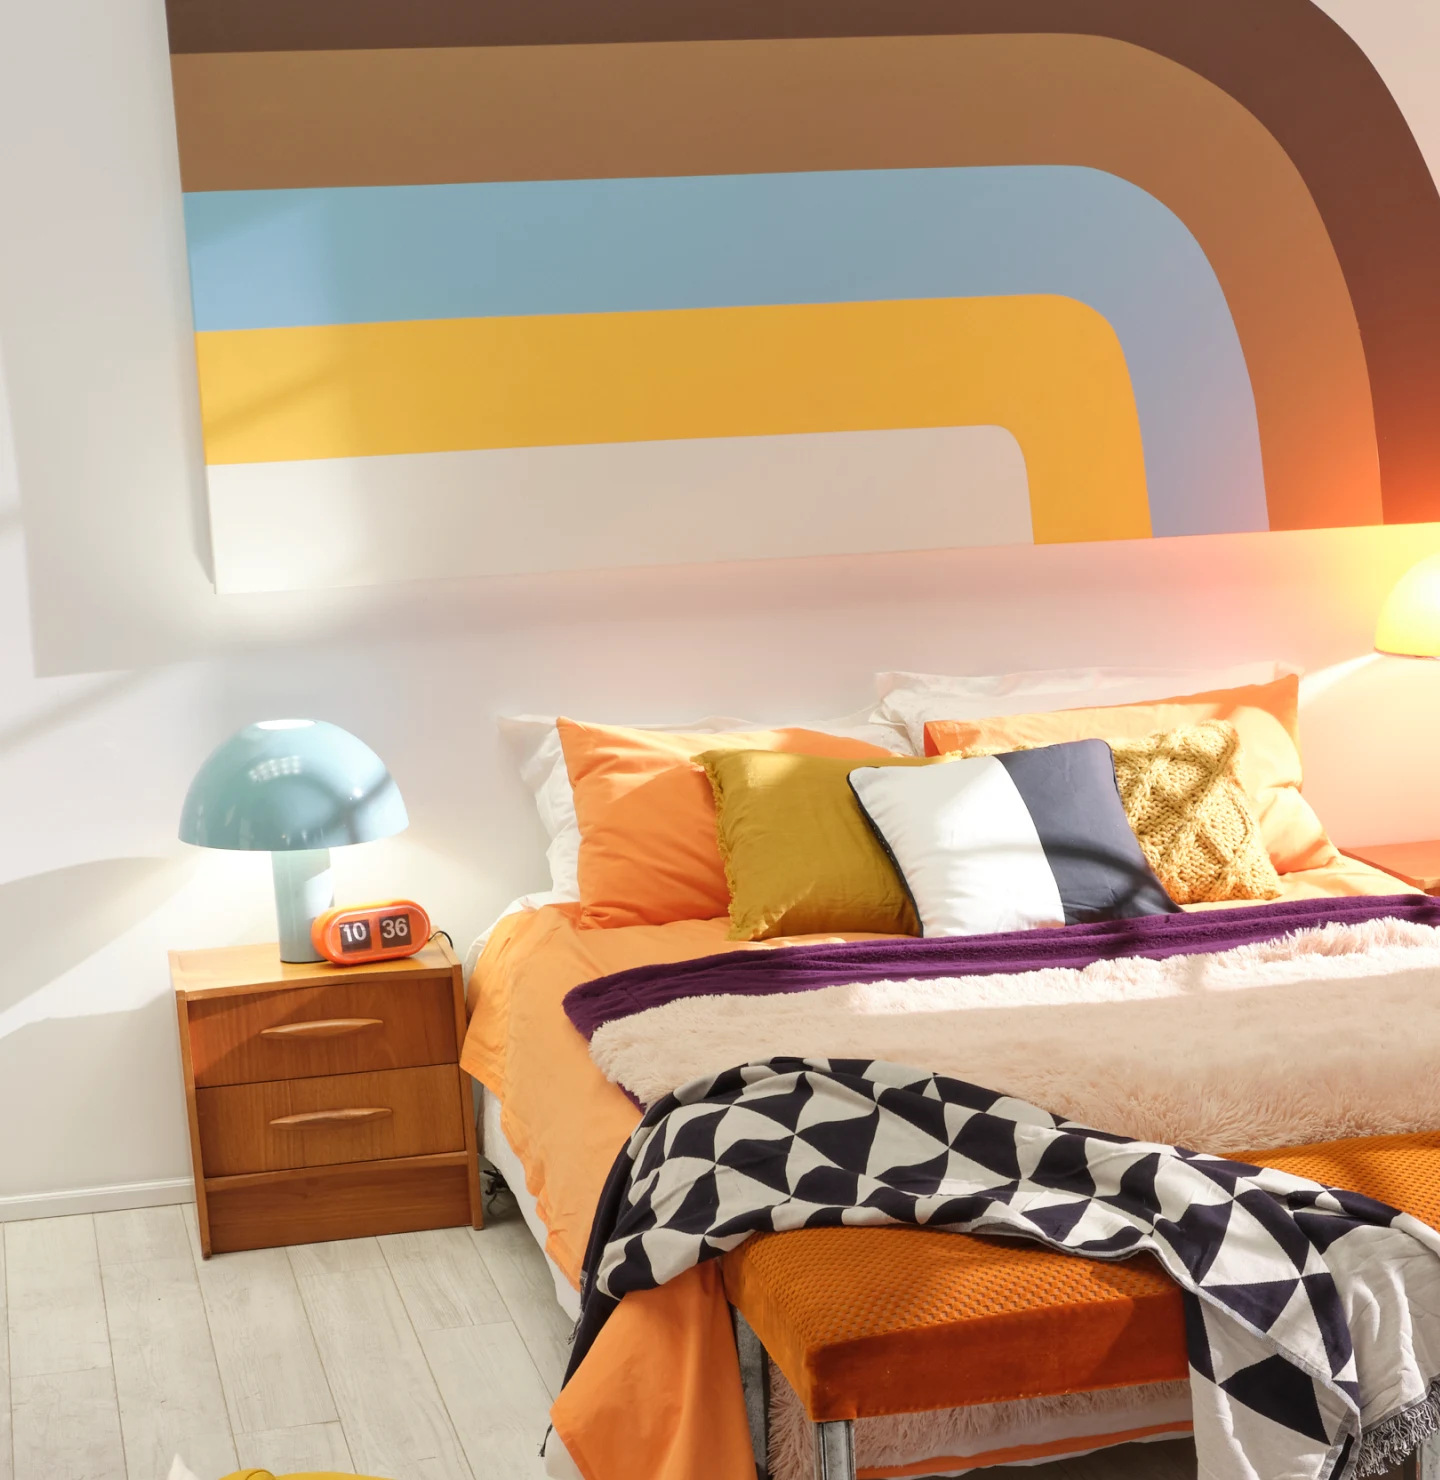 Close-up of a partial bedroom in 70s-inspired decor